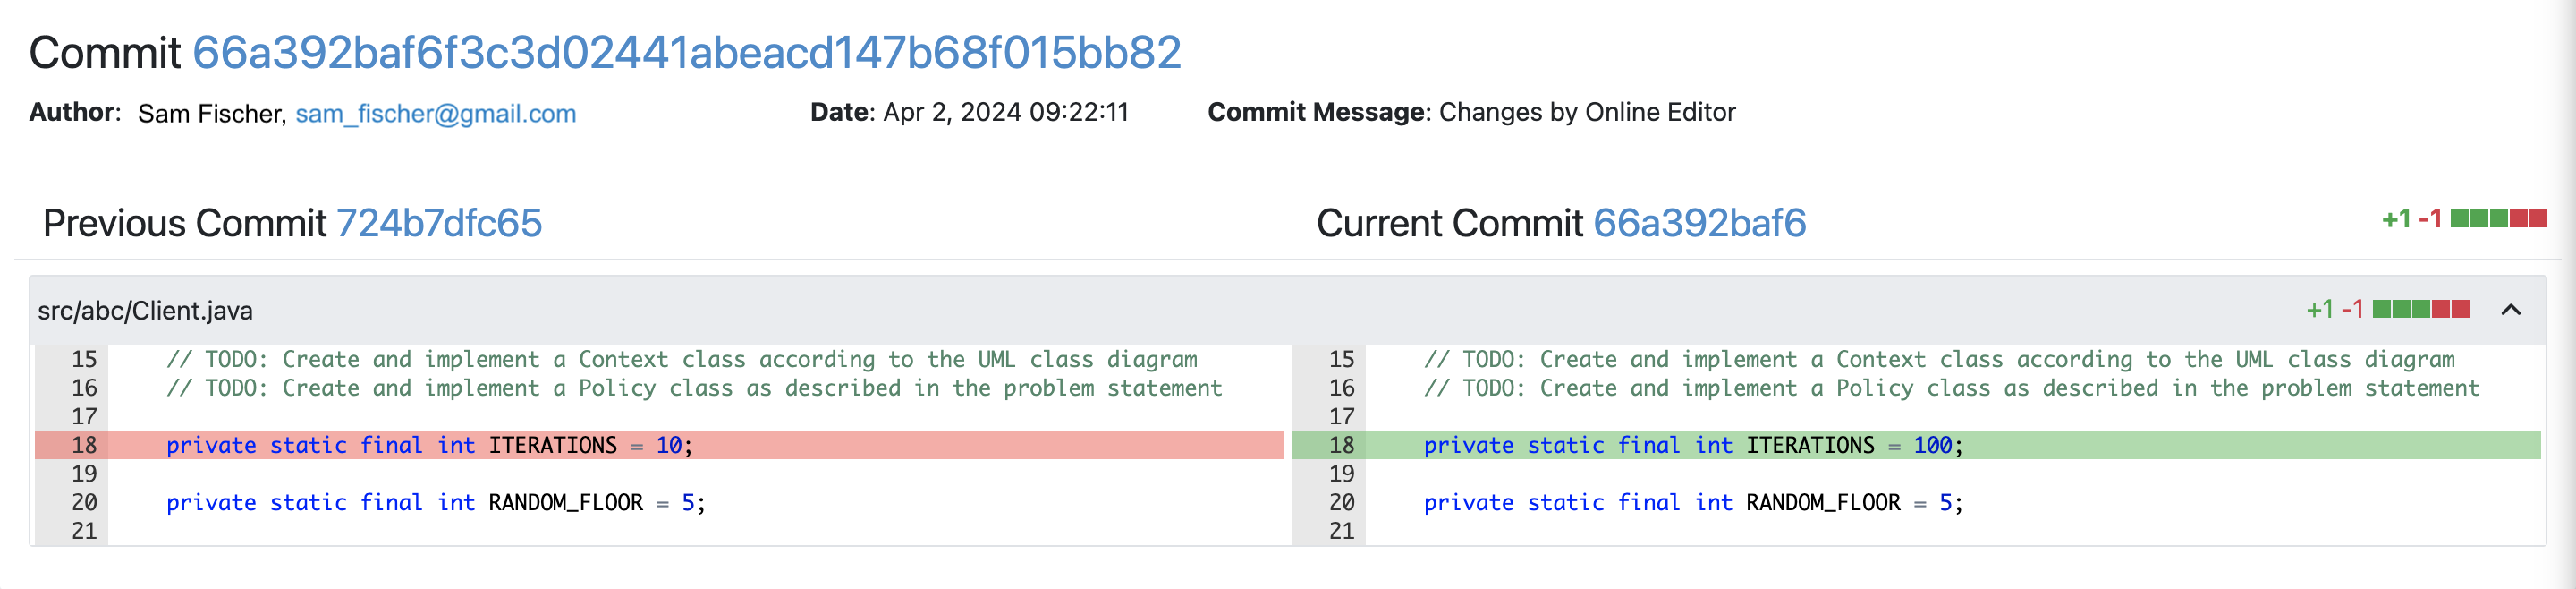 Commit Diff View